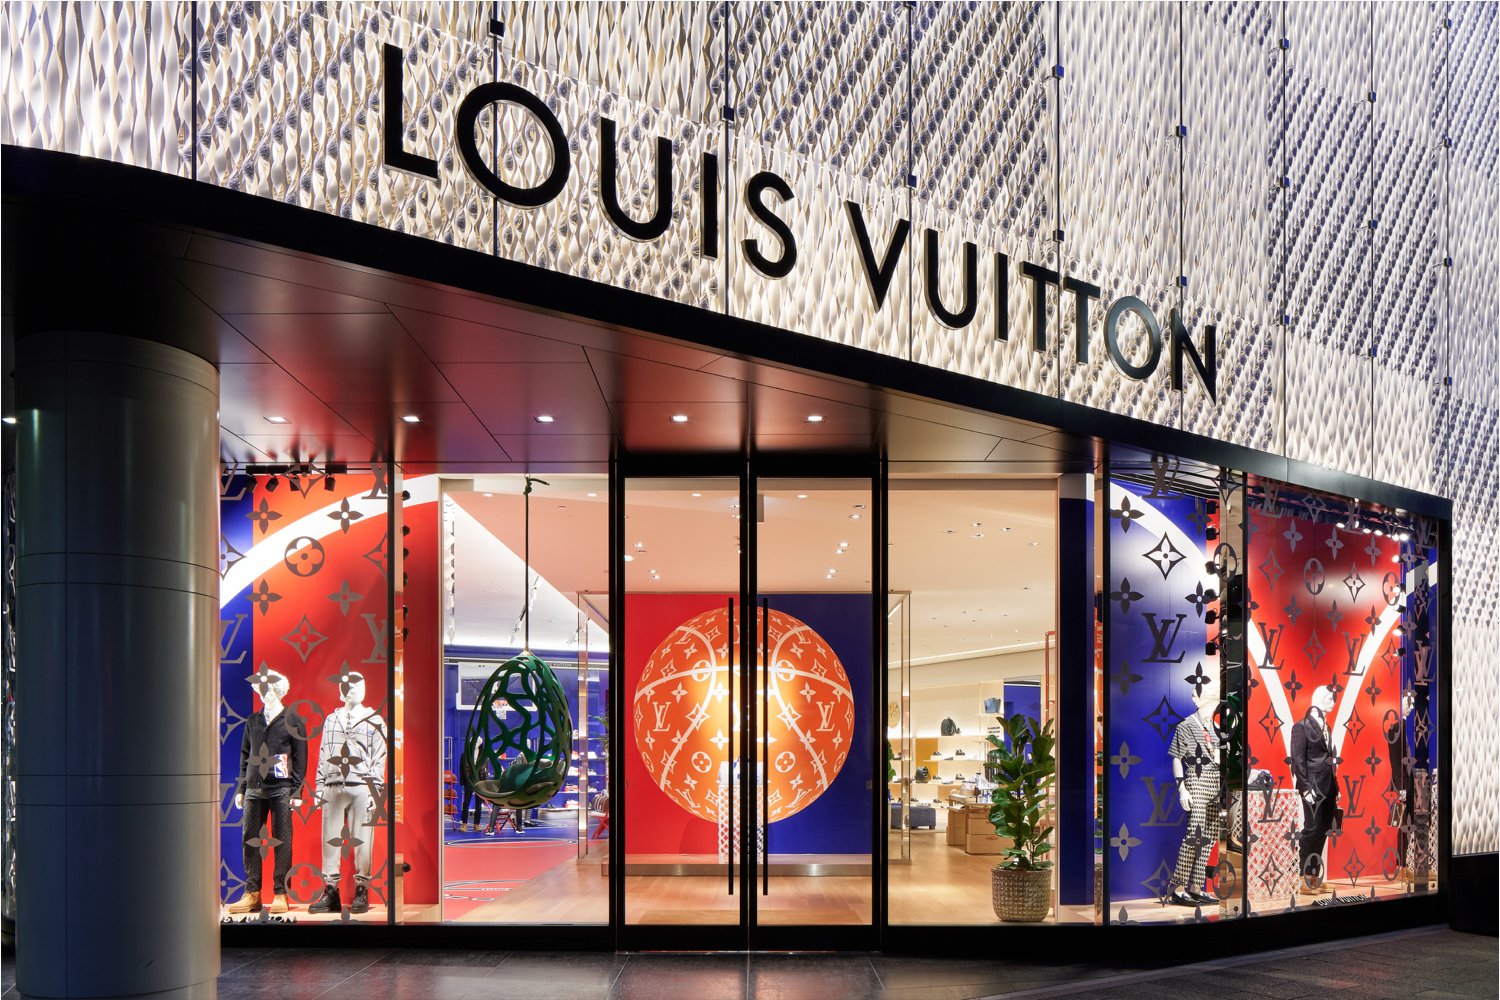 CPP-LUXURY.COM on X: NBA x Louis Vuitton full capsule collection available  in Tokyo at new men's store in Miyashita  #NBAxLV  #LVxNBA #LouisVuittonXNBA #NBA #LouisVuitton #VirgilAbloh #capsule #luxury  #luxuryfashion @LVMH